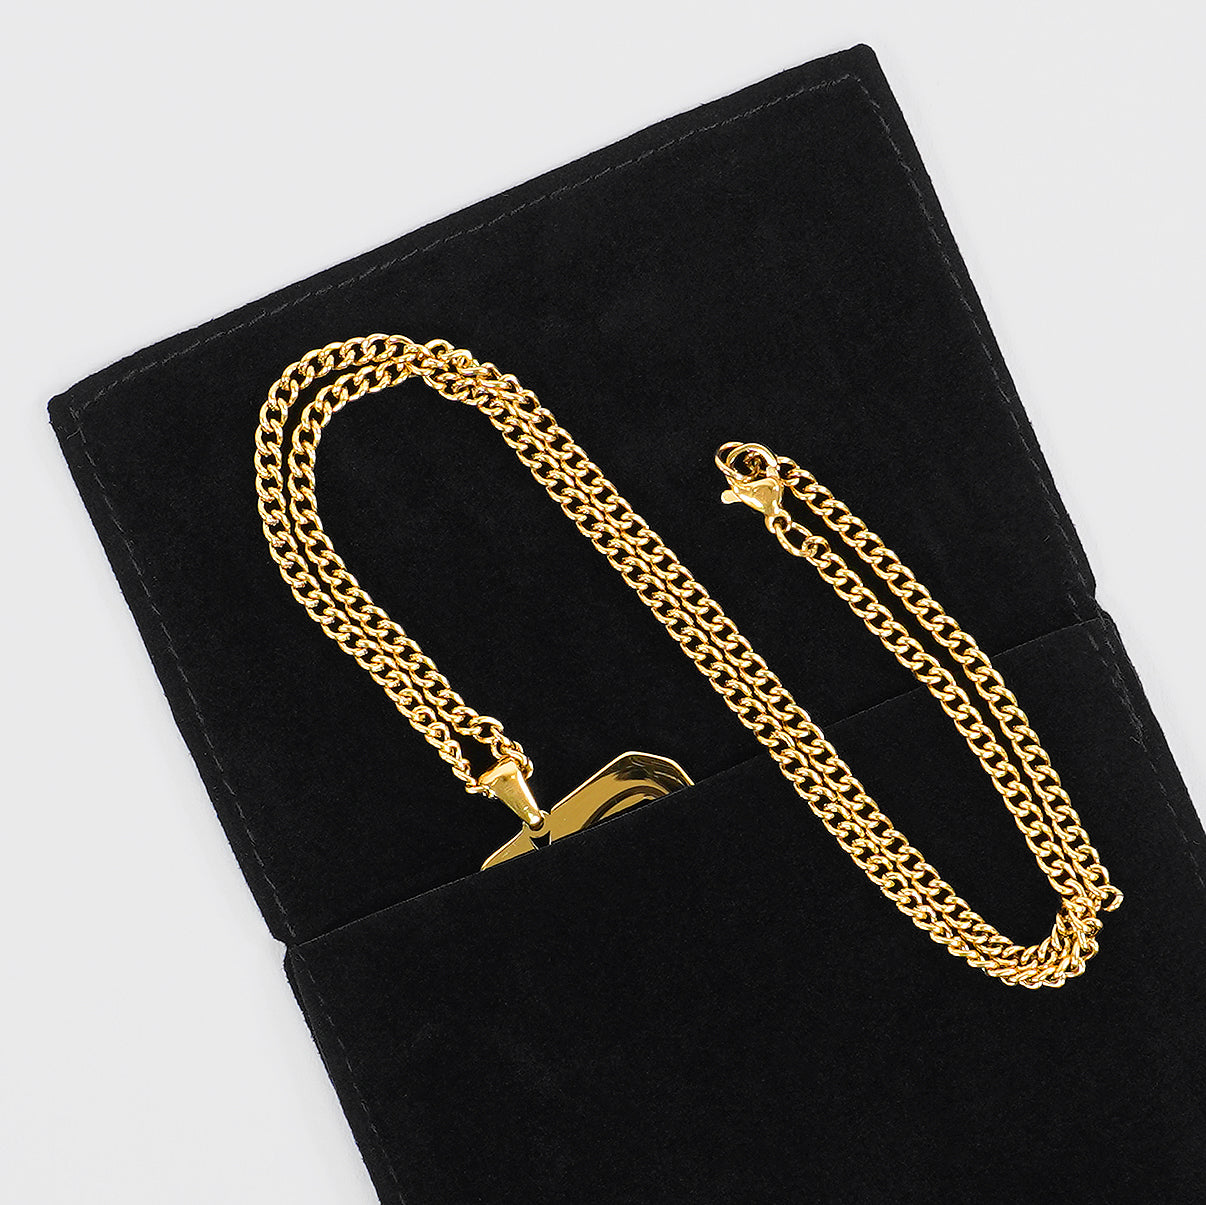 77 Number Pendant with Chain Necklace - Gold Plated Stainless Steel